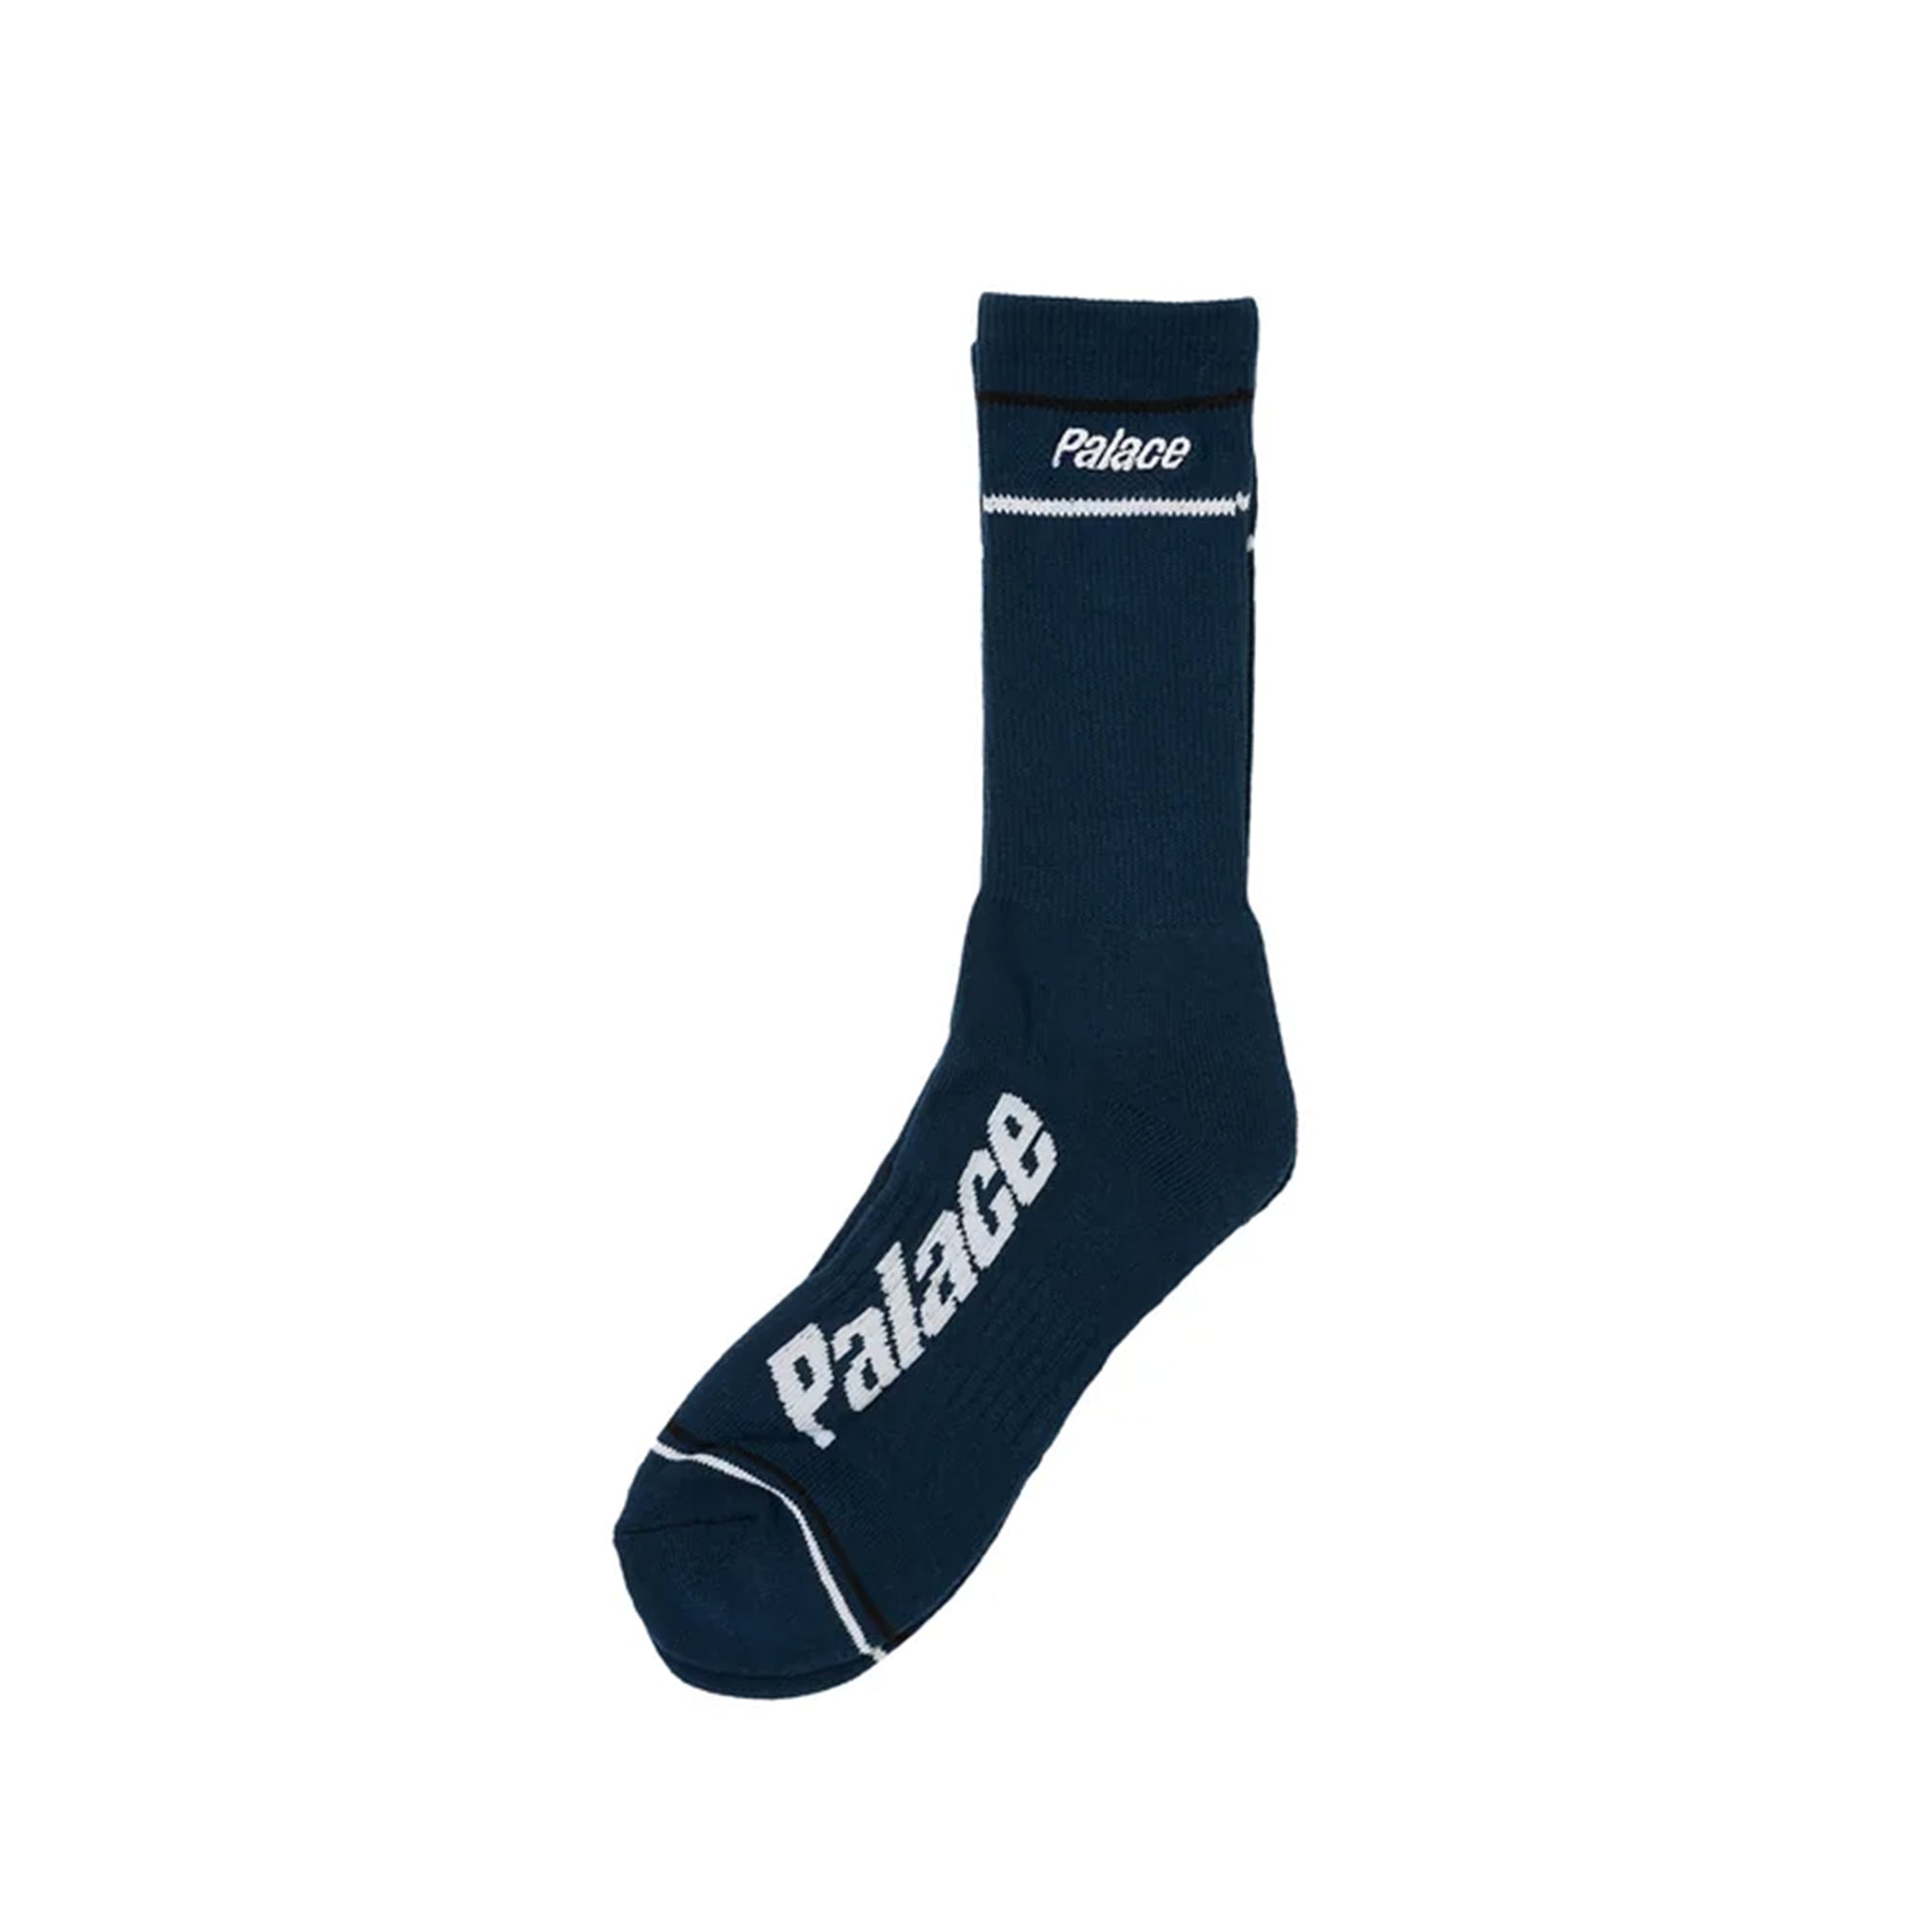 Palace - Men’s Lo Case Sock - (Navy) view 1